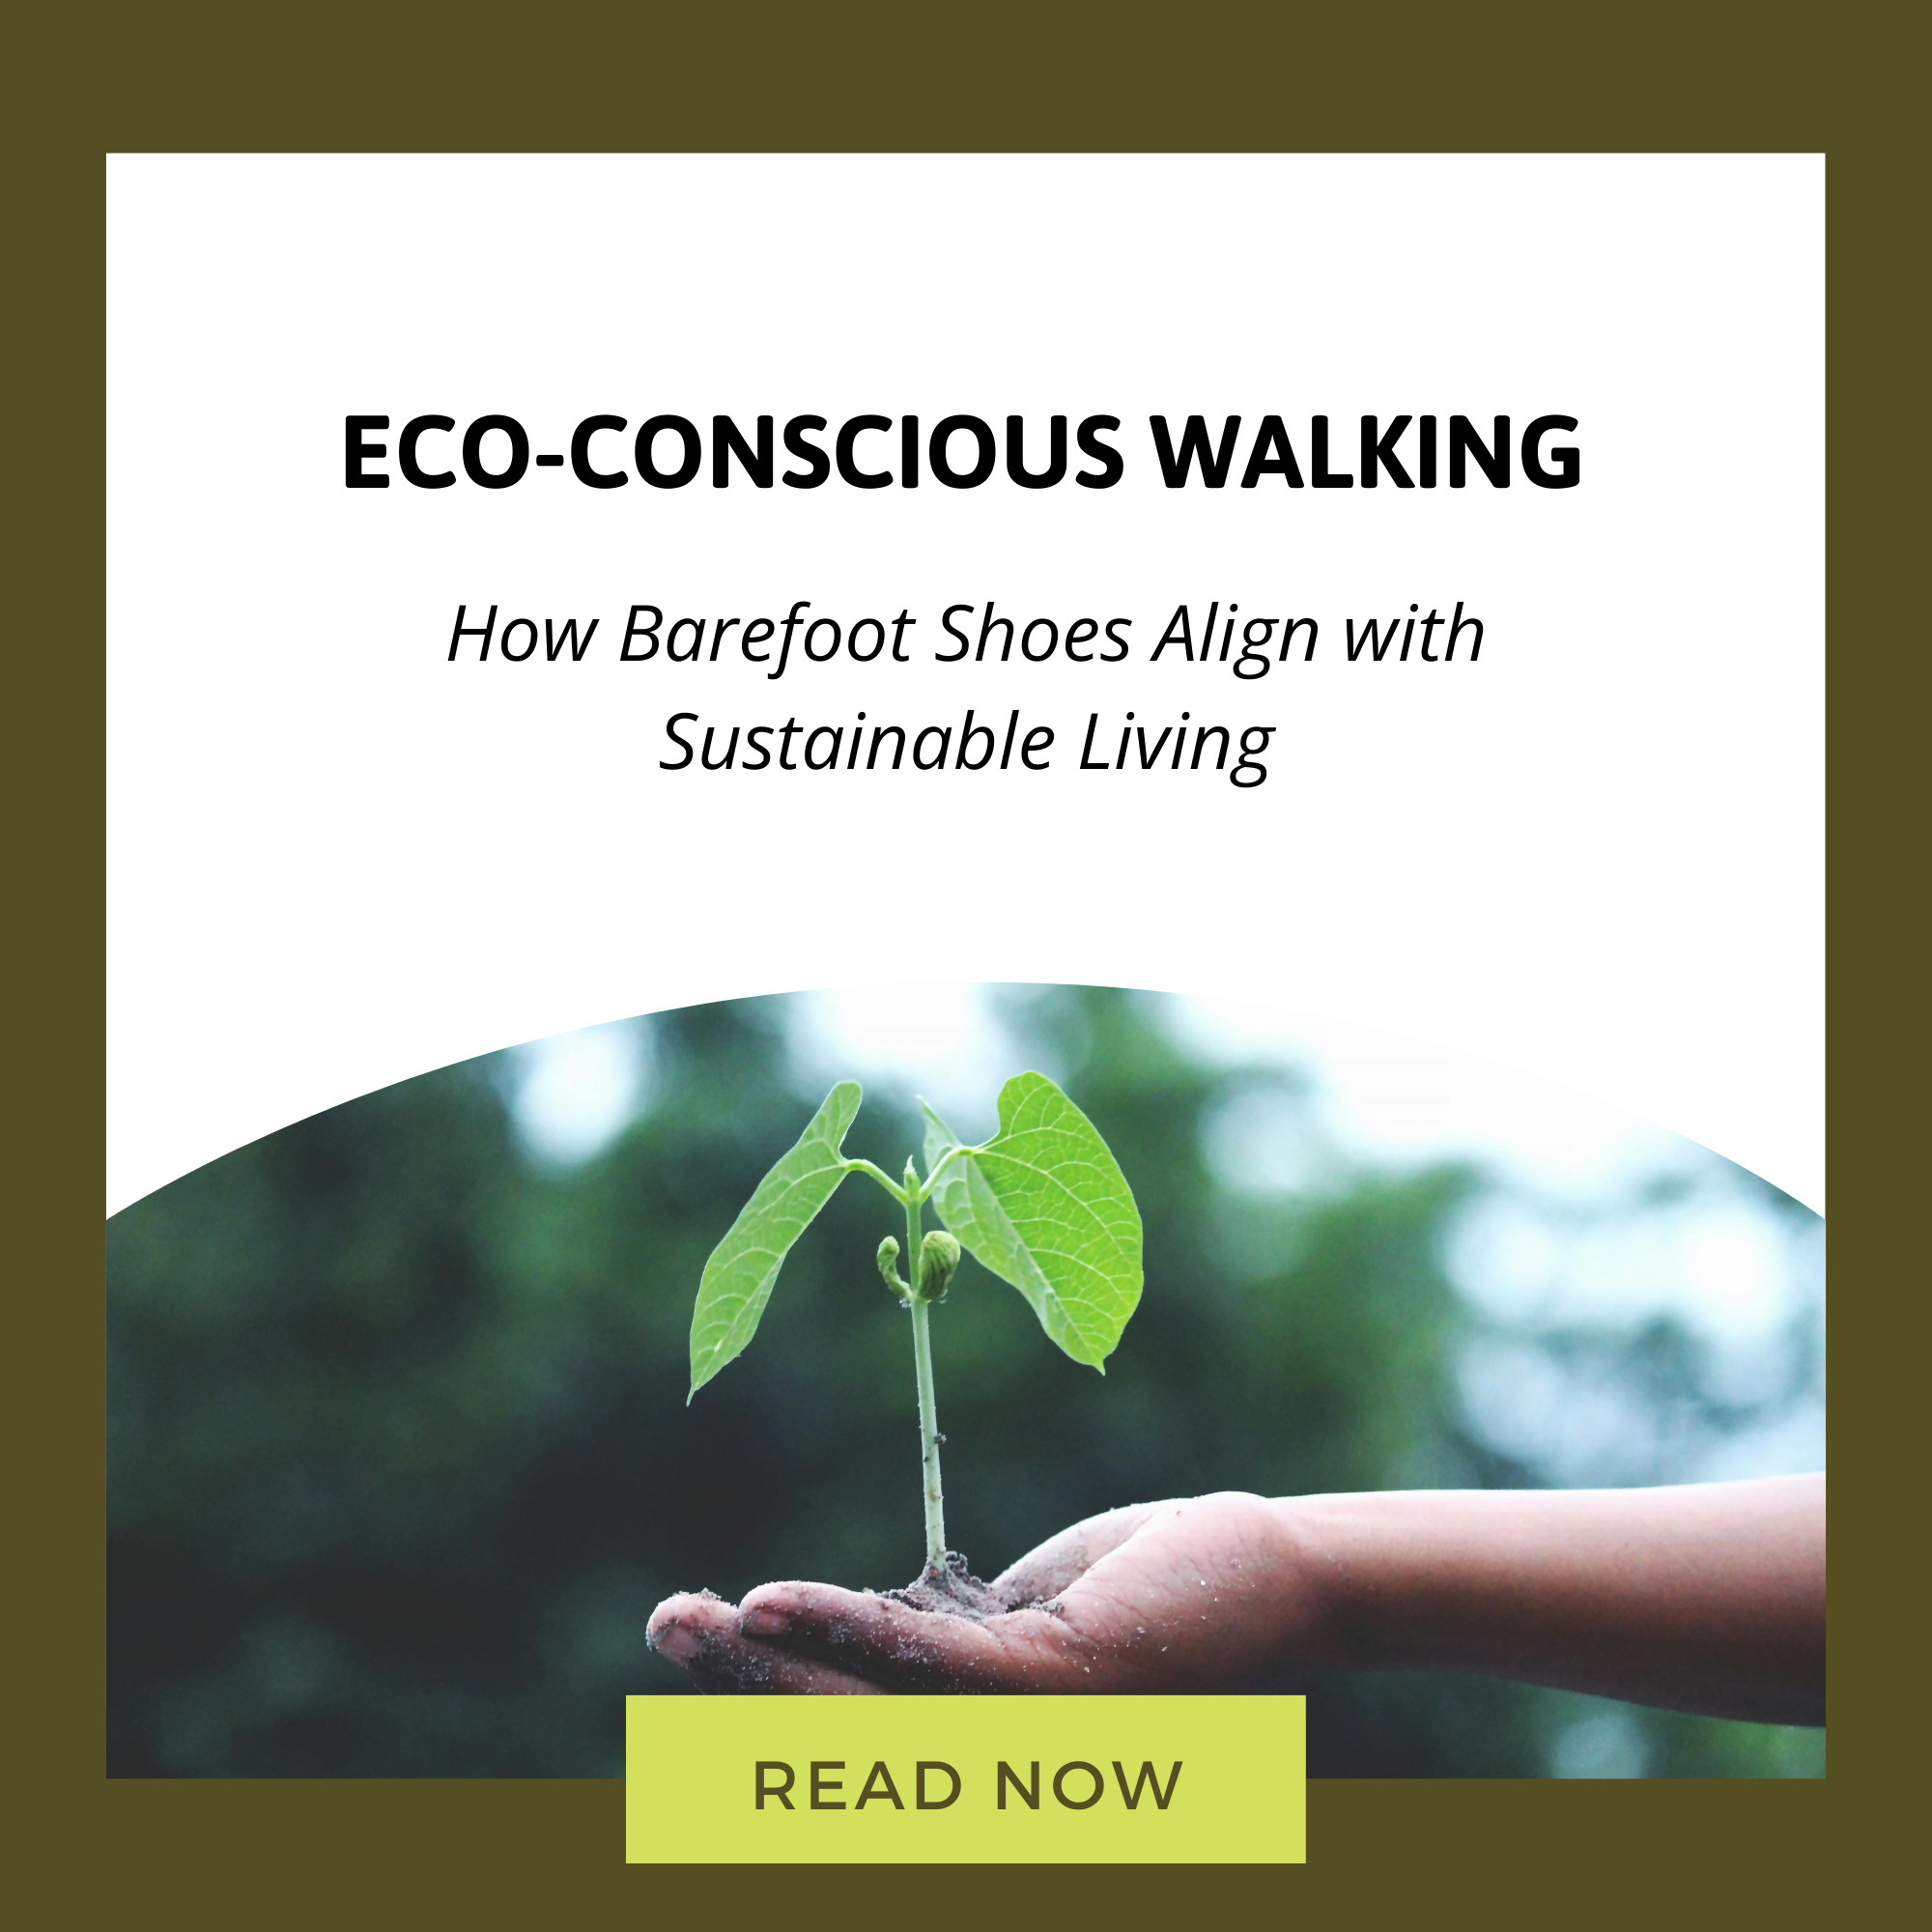 Eco-Conscious Walking: How Barefoot Shoes Align with Sustainable Living